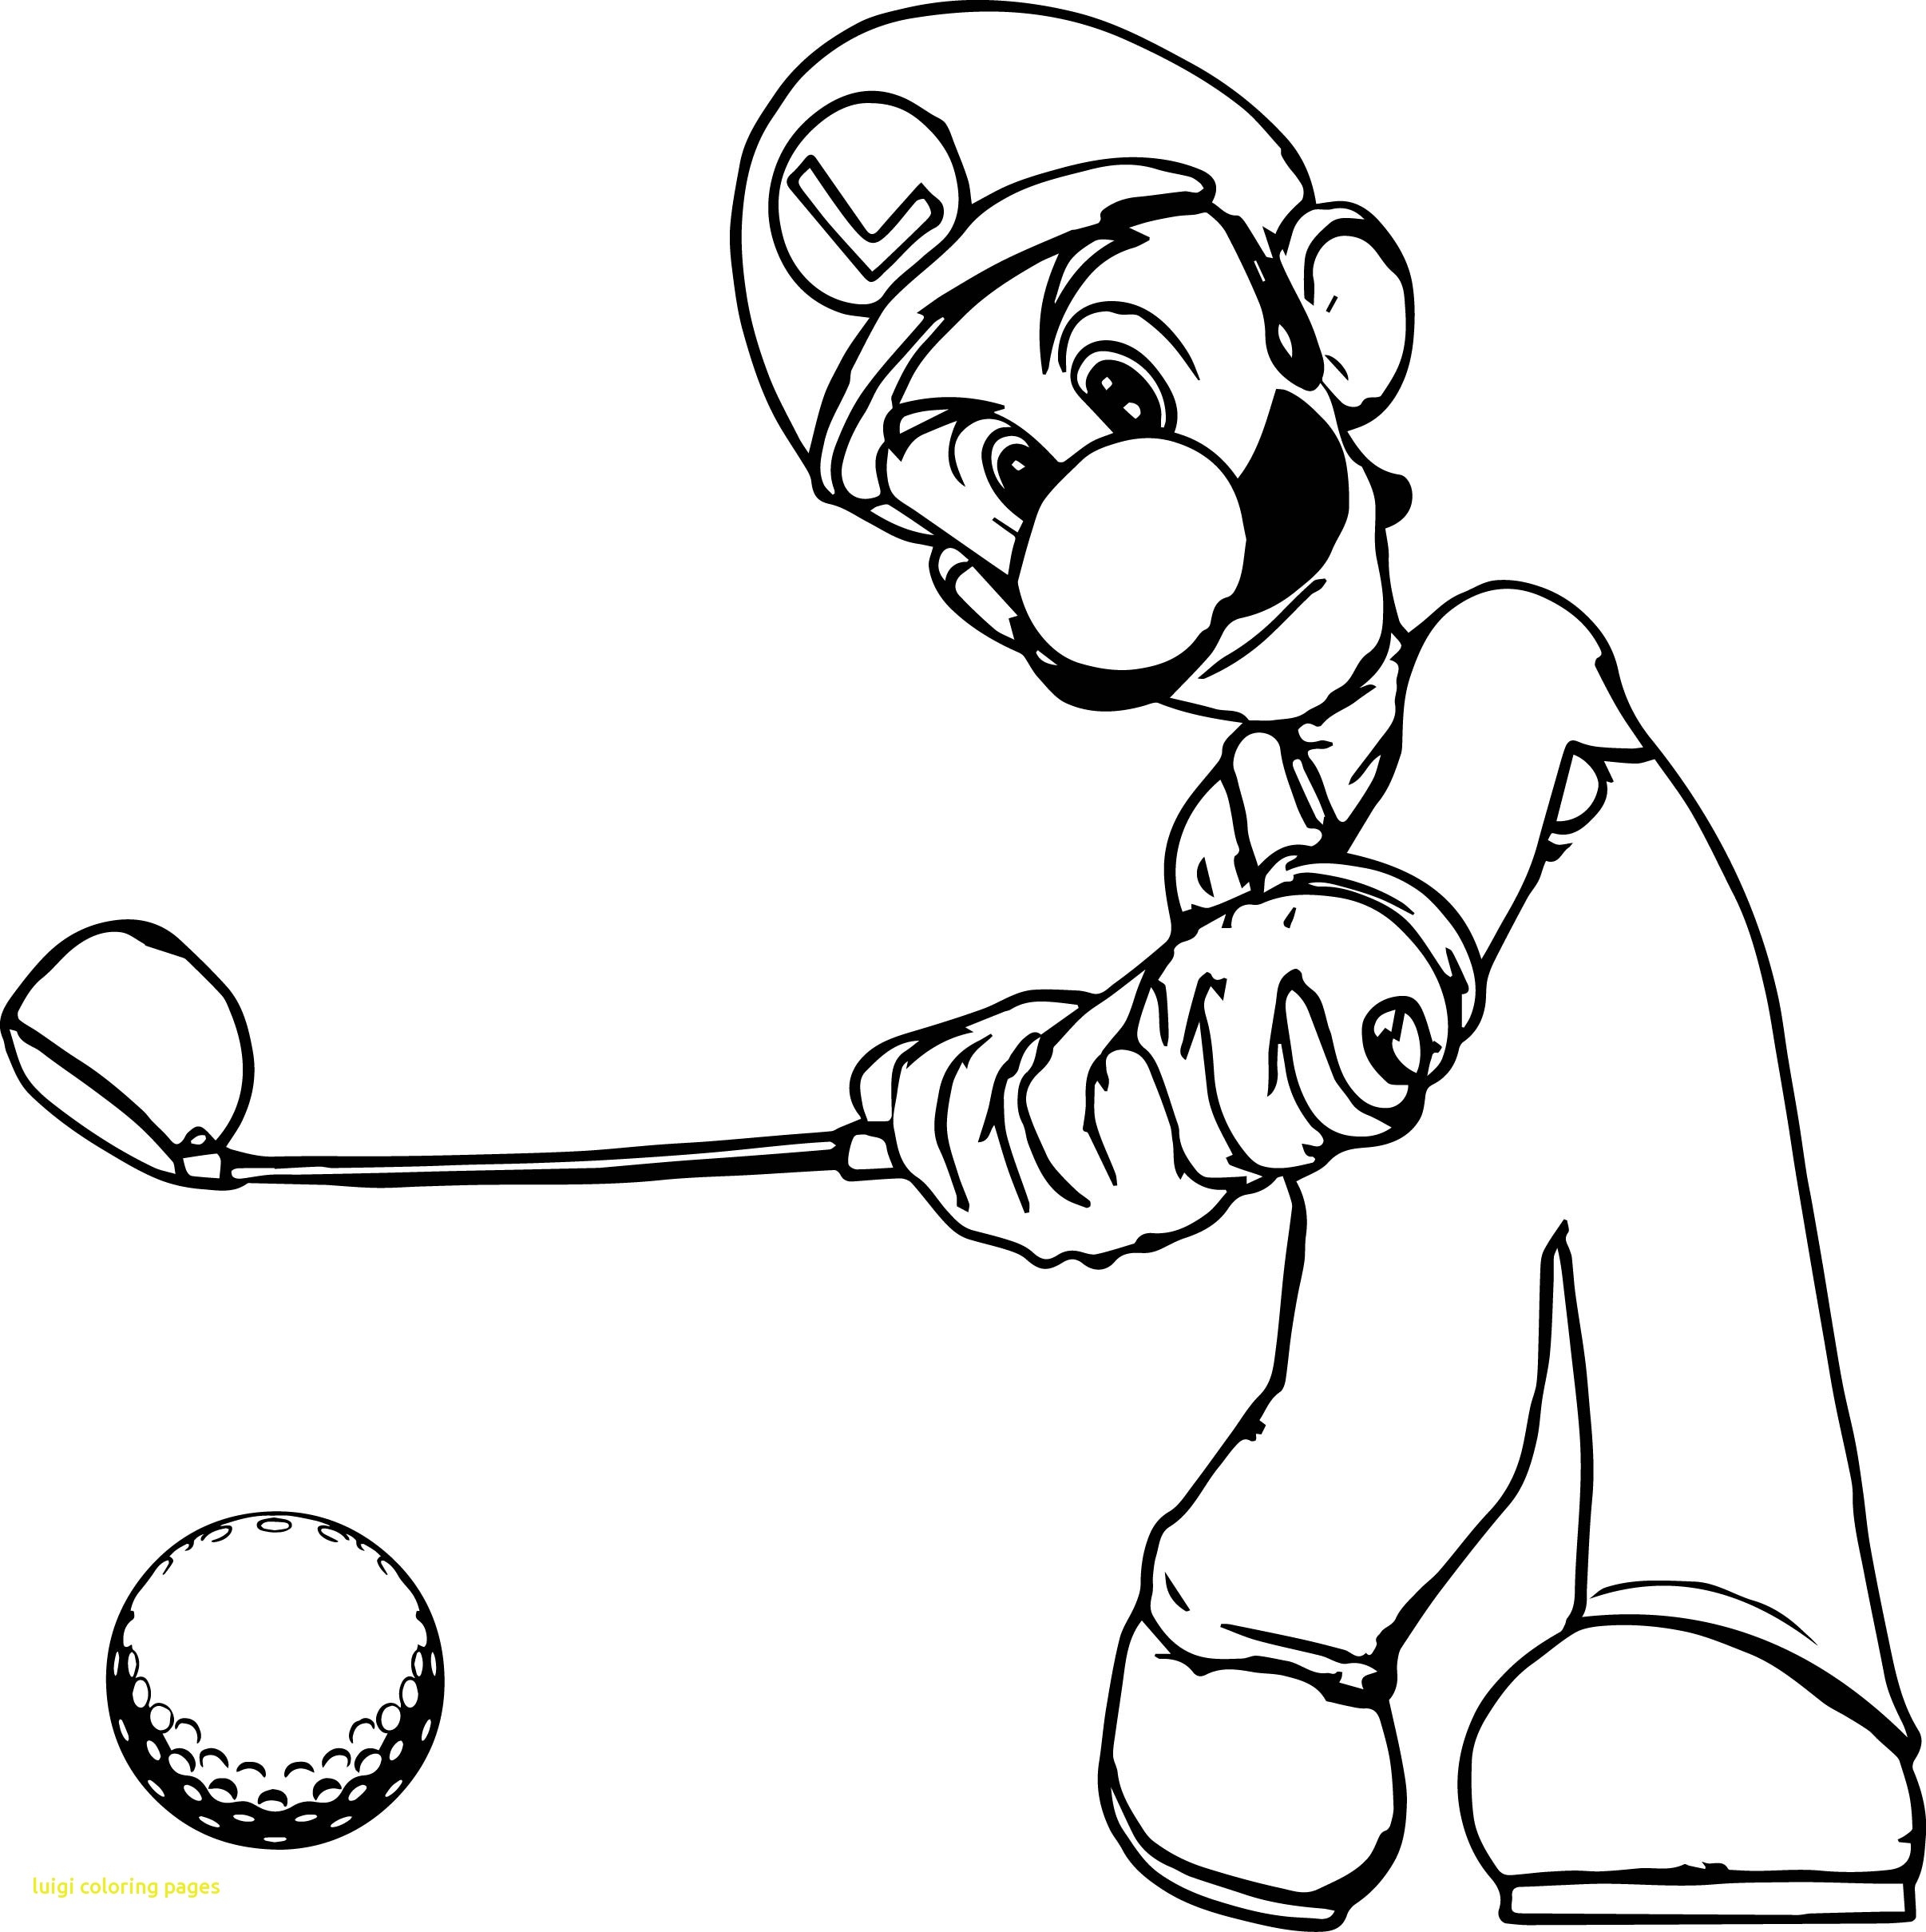 Baby Luigi Coloring Pages At Getcolorings.com | Free Printable